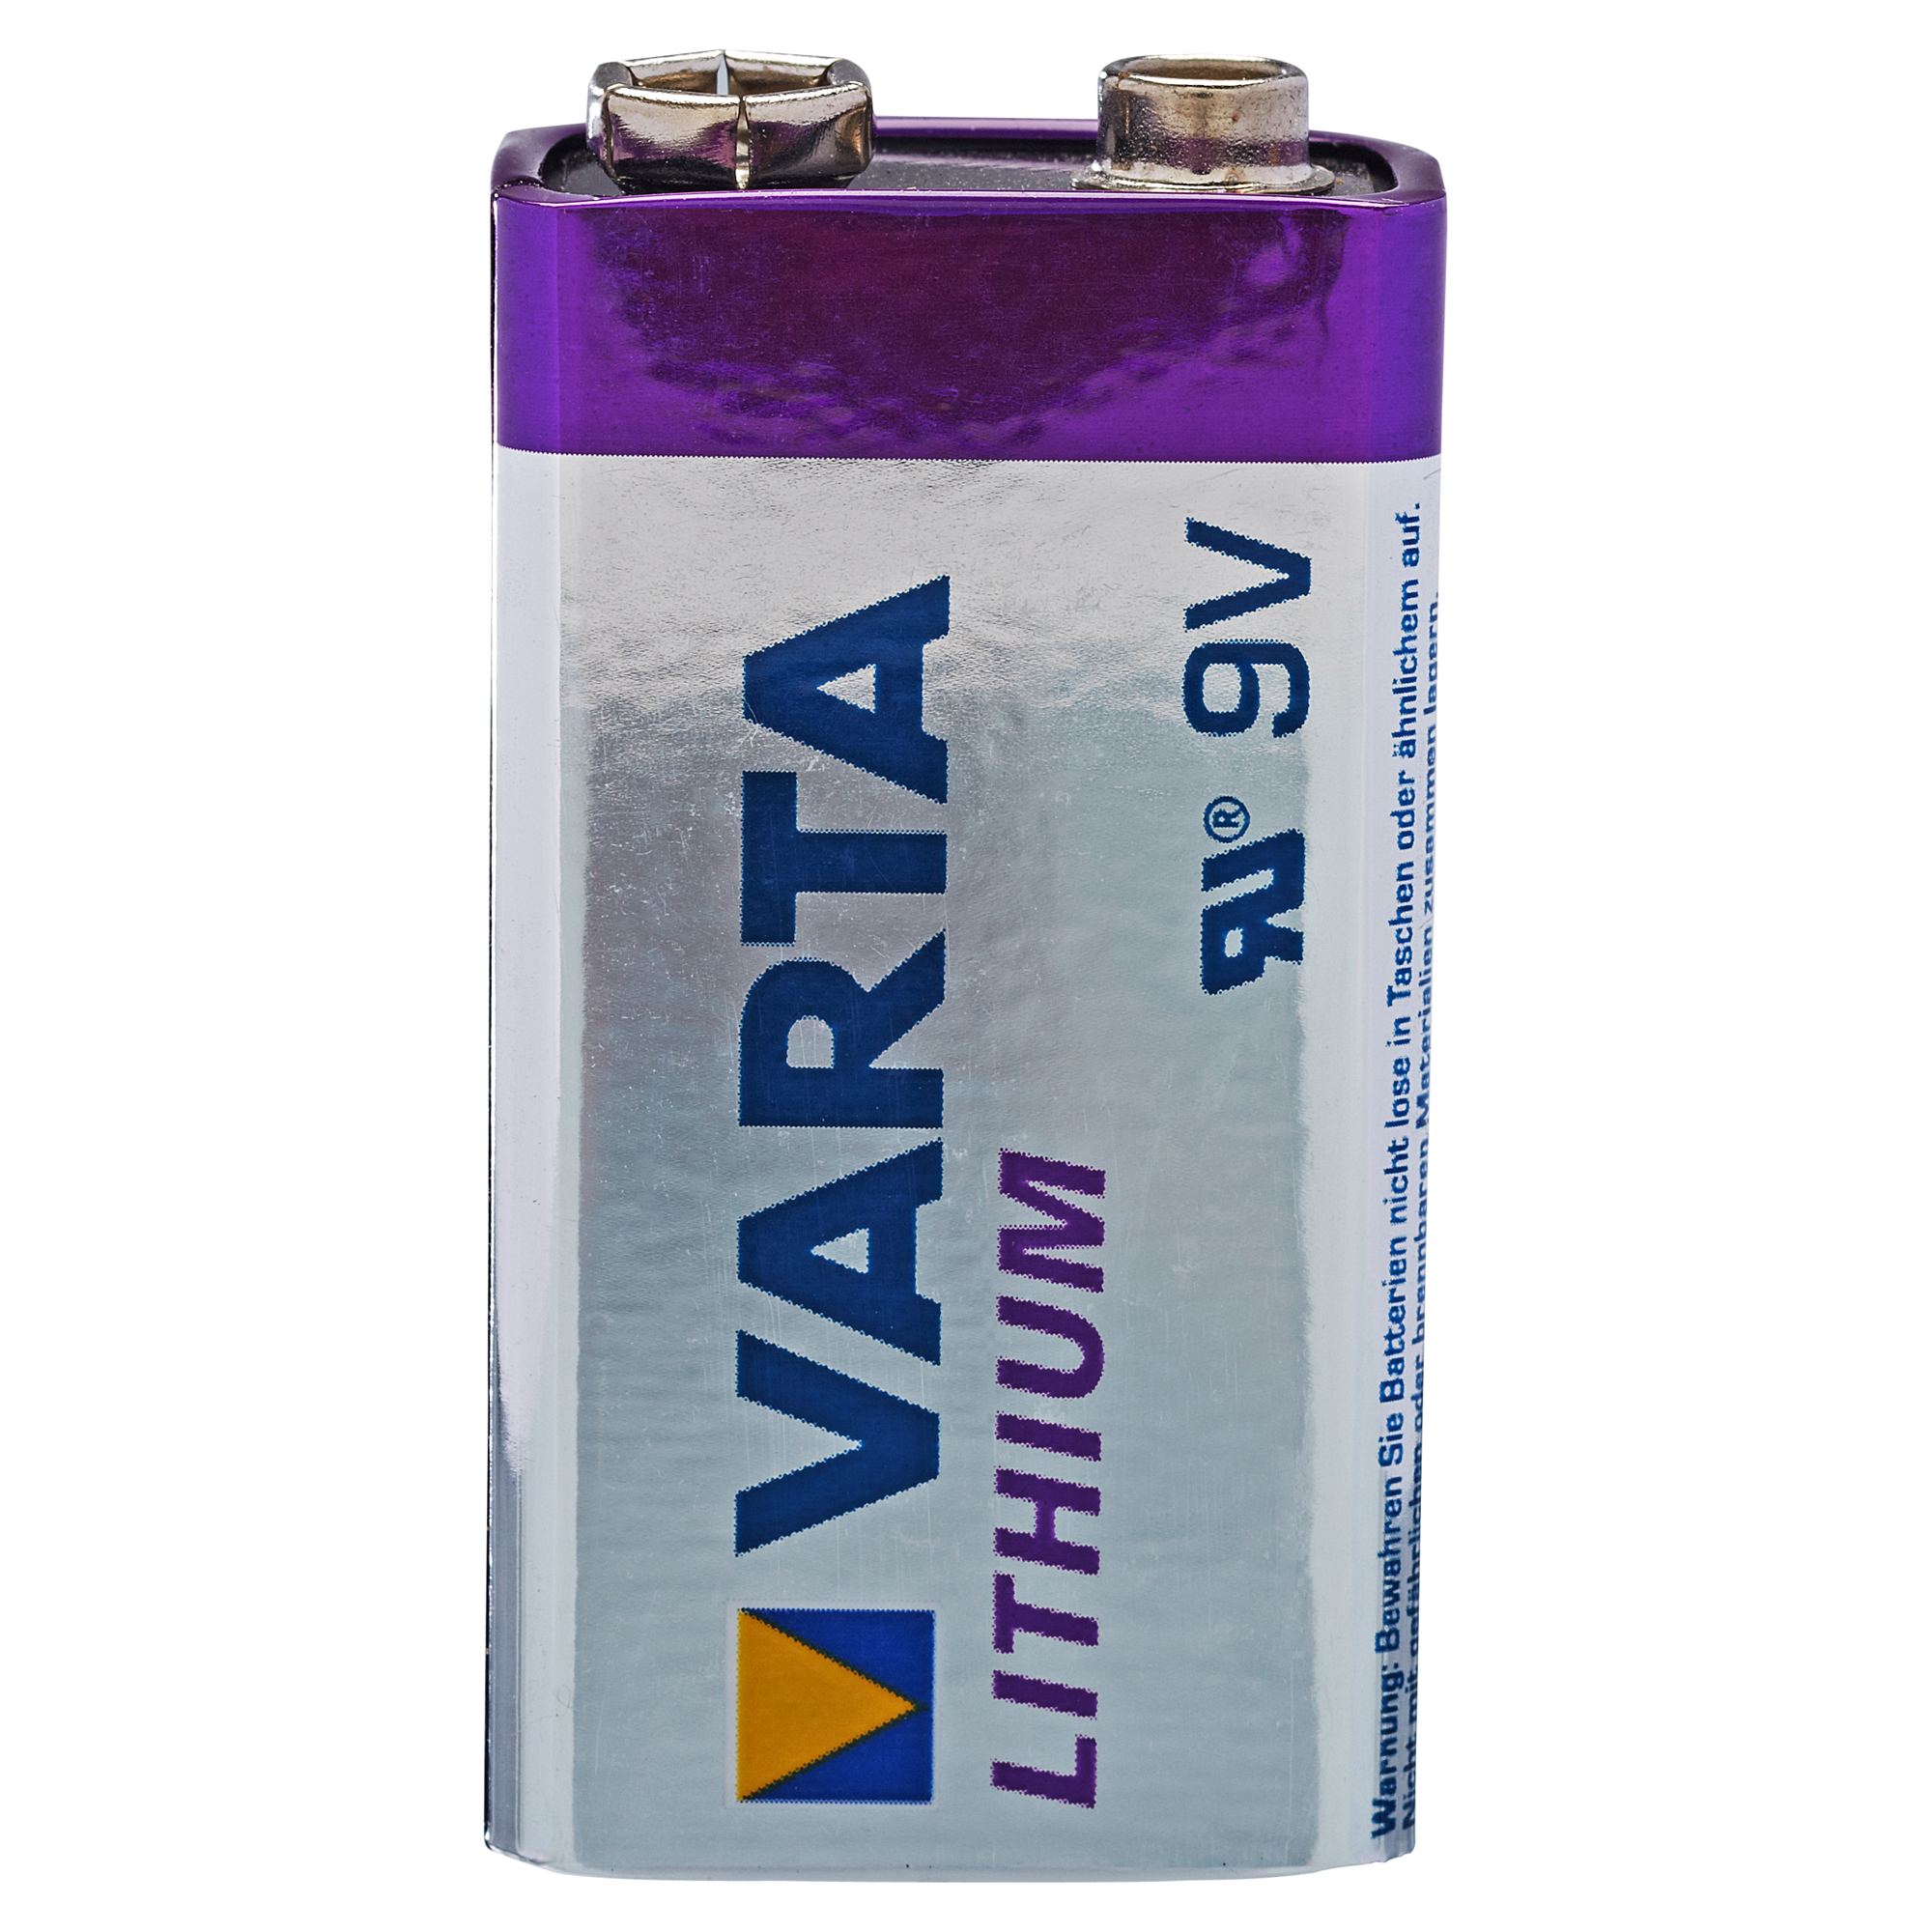 Batterie Lithium 9 V + product picture